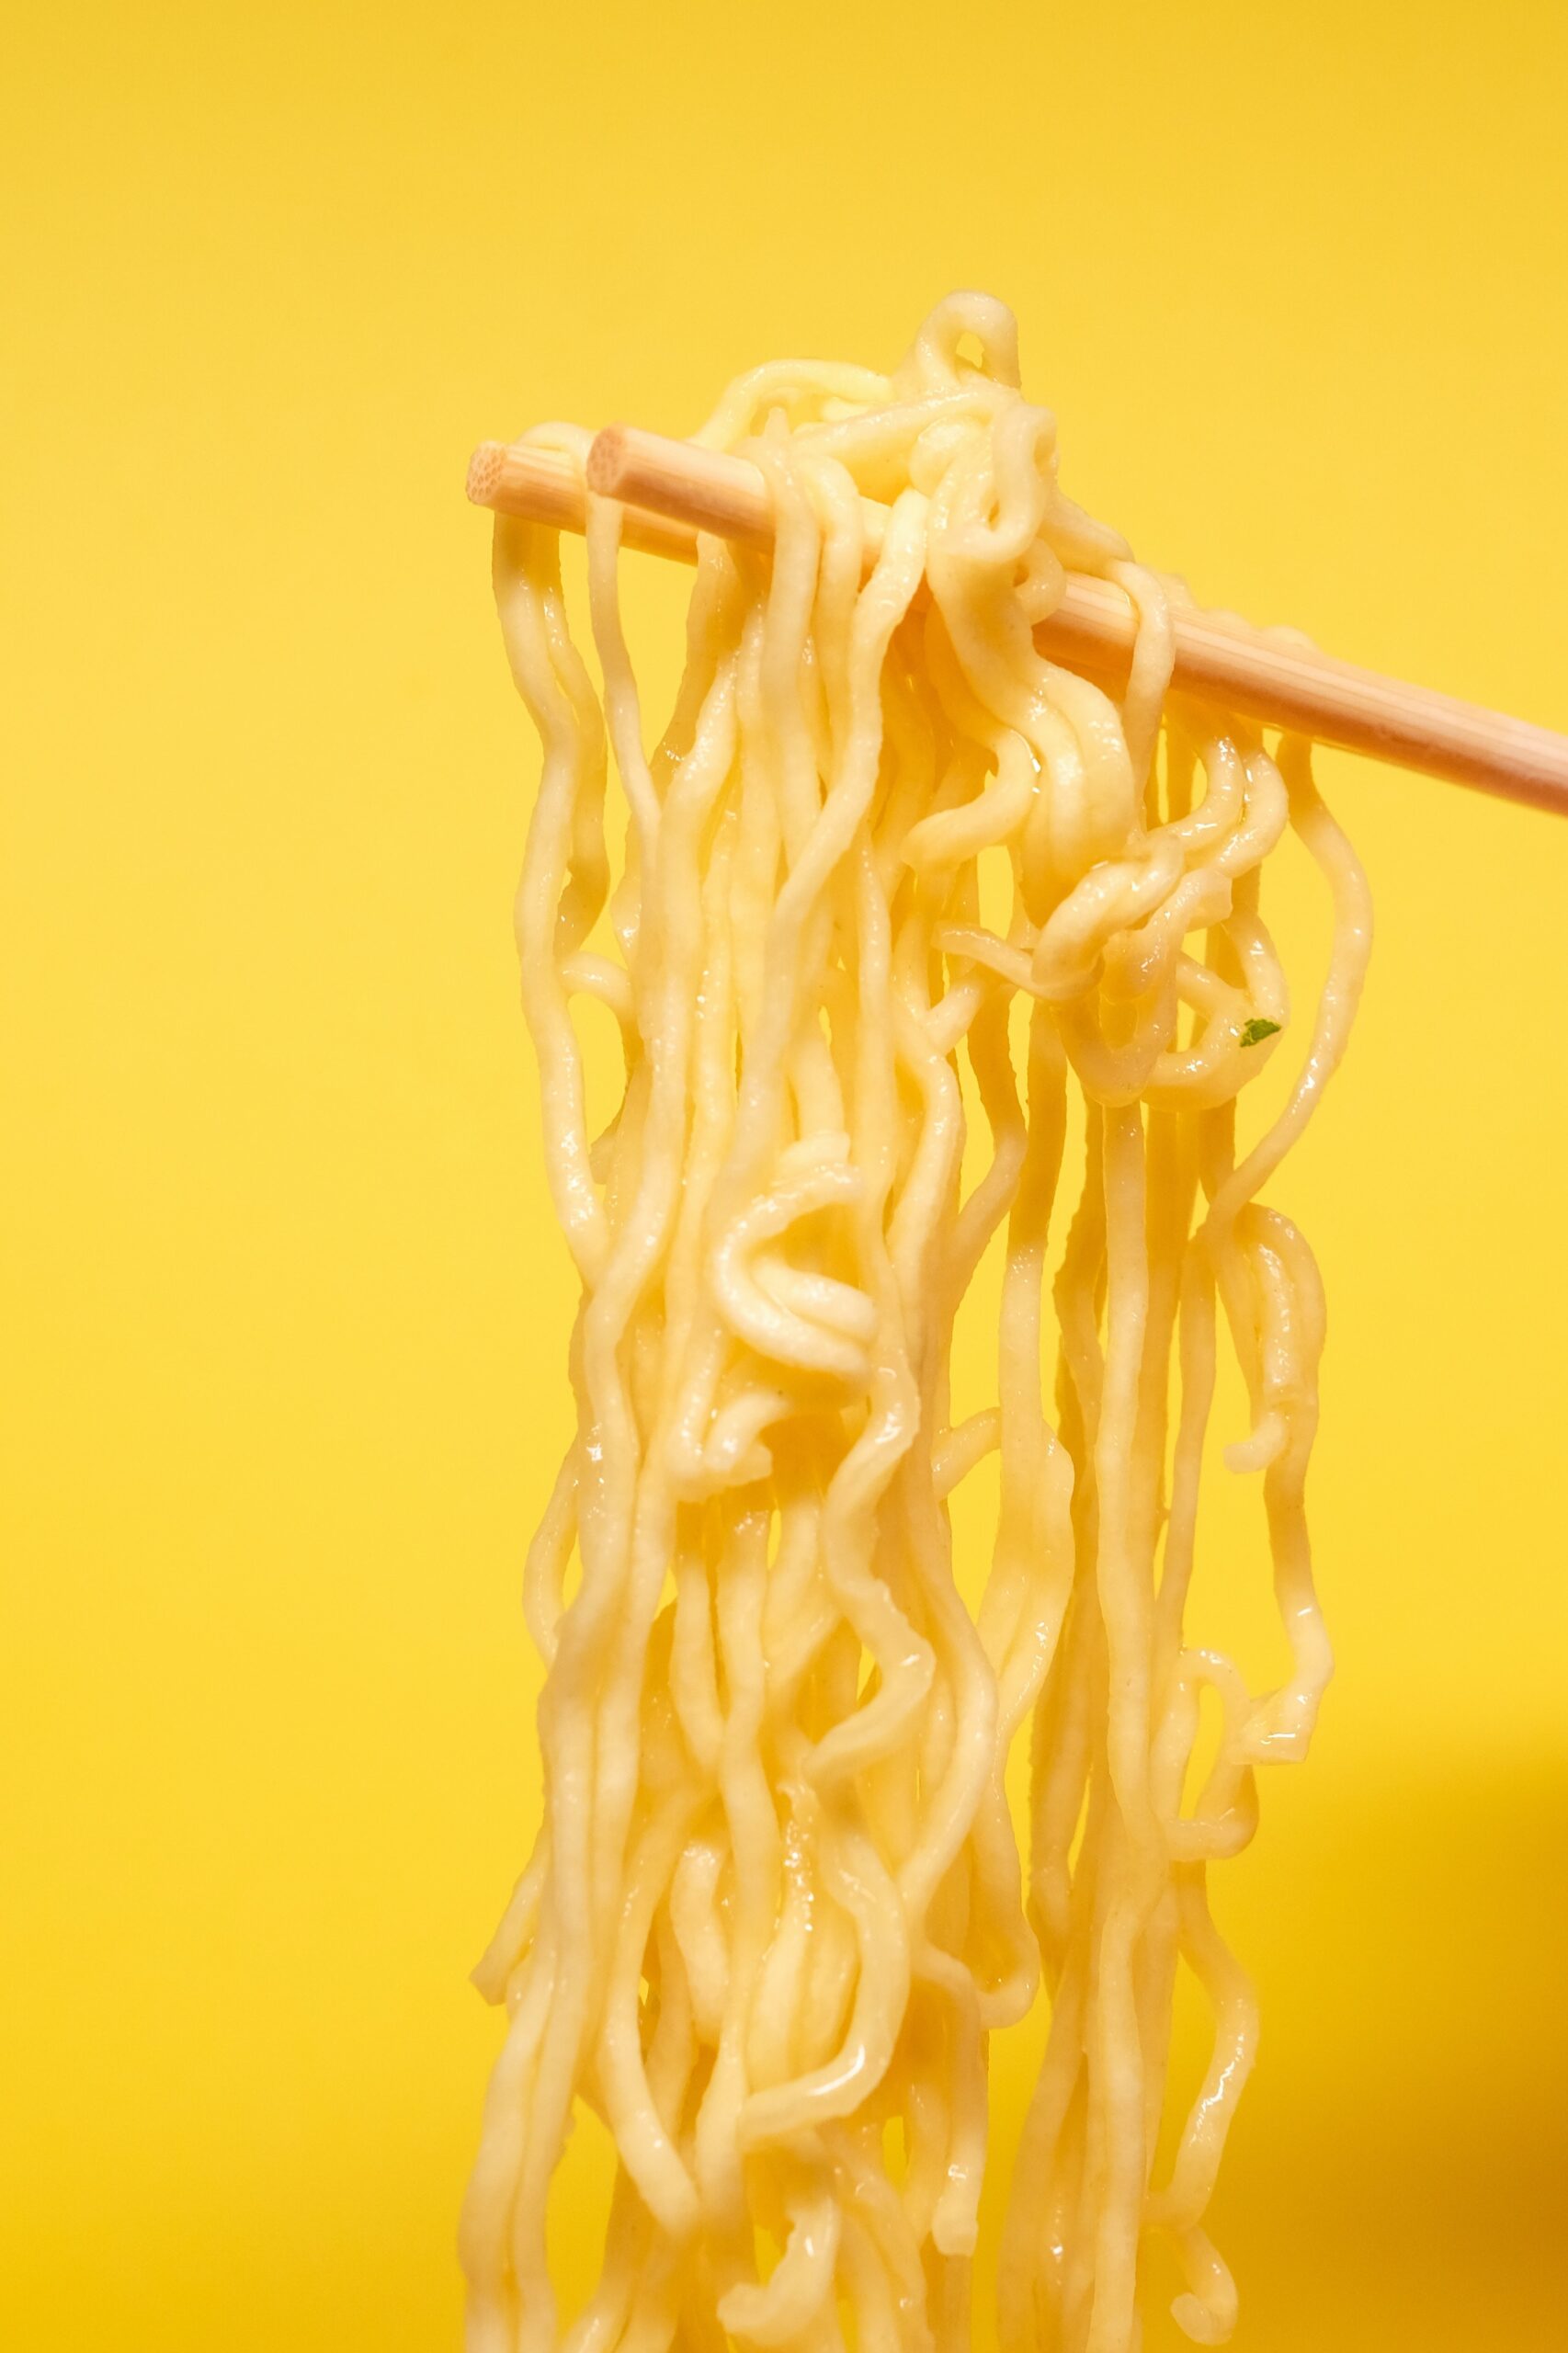 Is Yippee Noodles Good For Your Health?